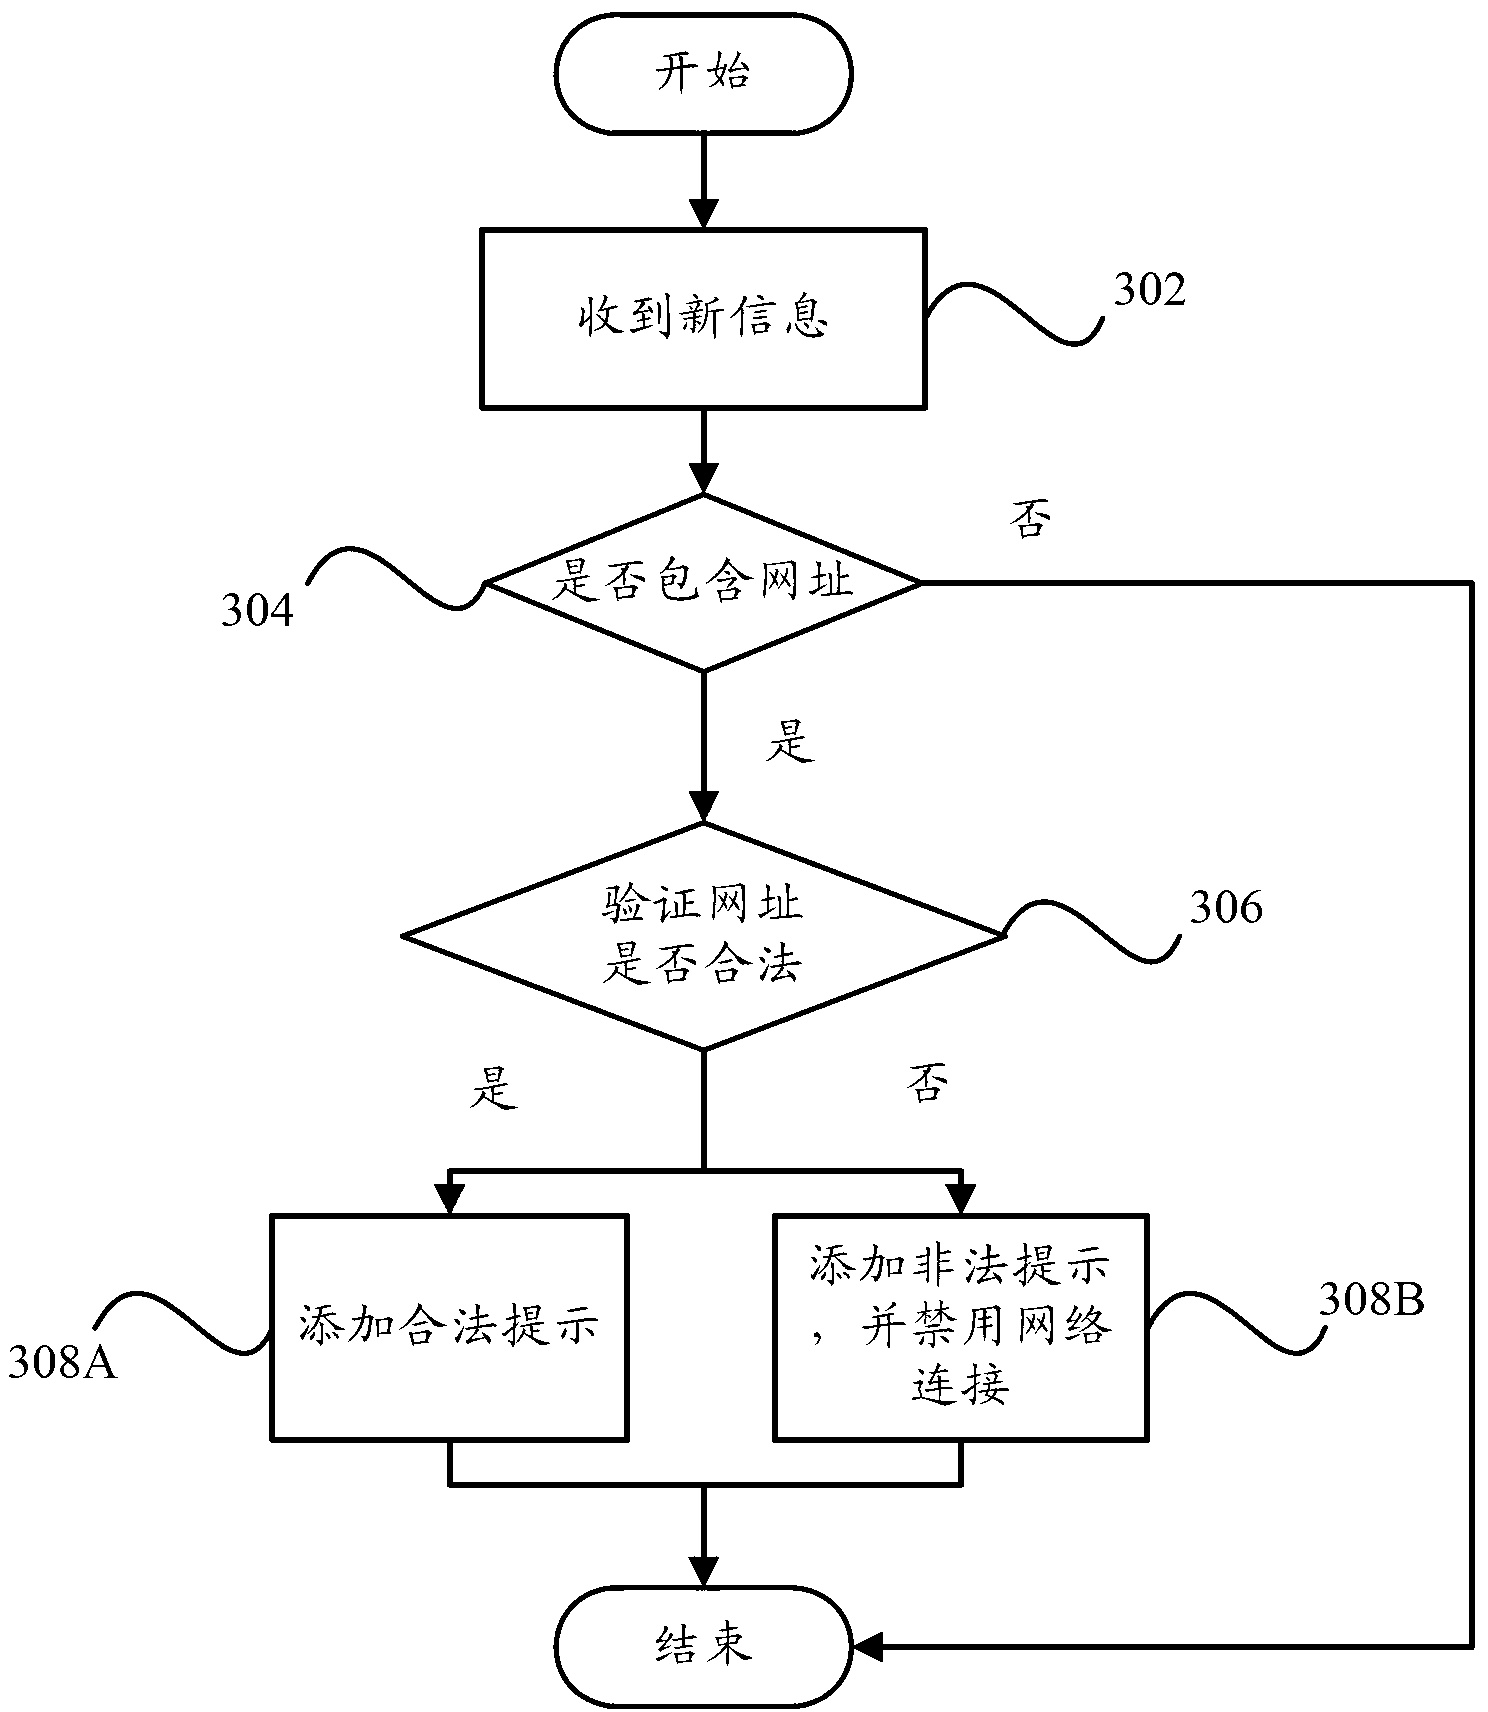 Terminal and security processing method for information contents